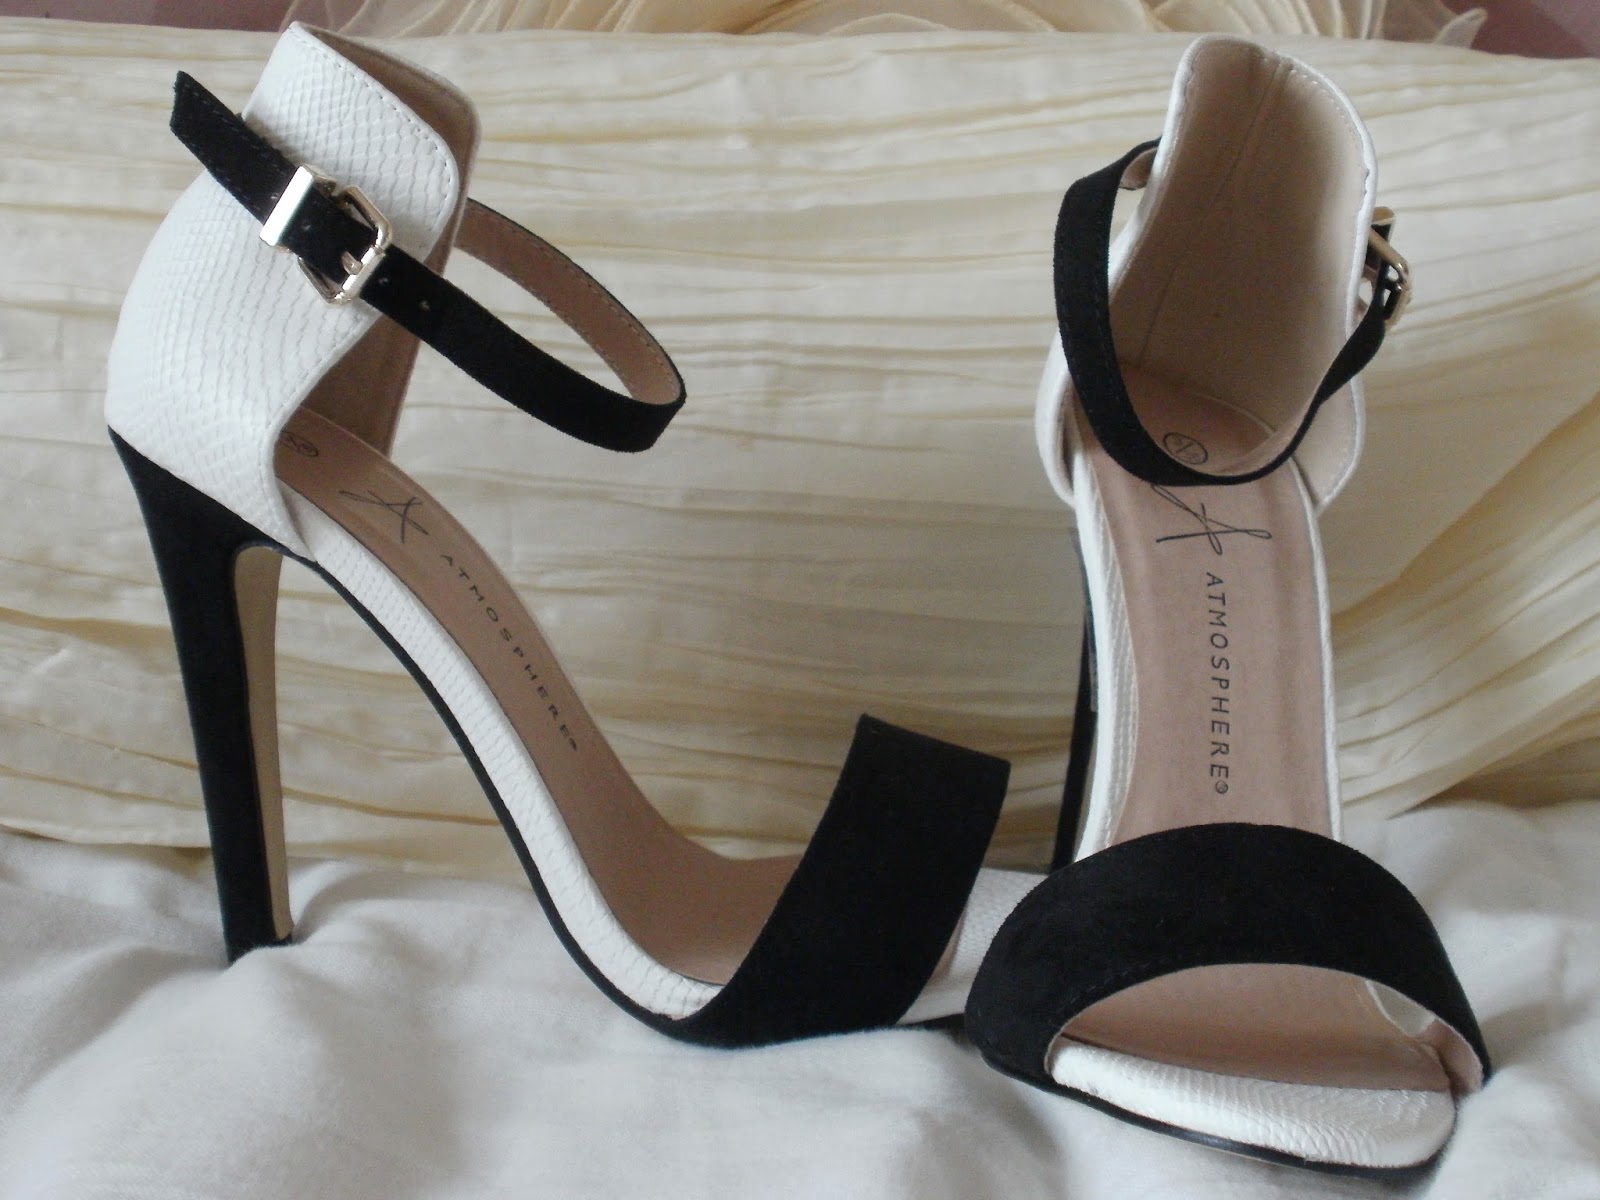 trendsepatupria: Black And White Heeled Shoes Images